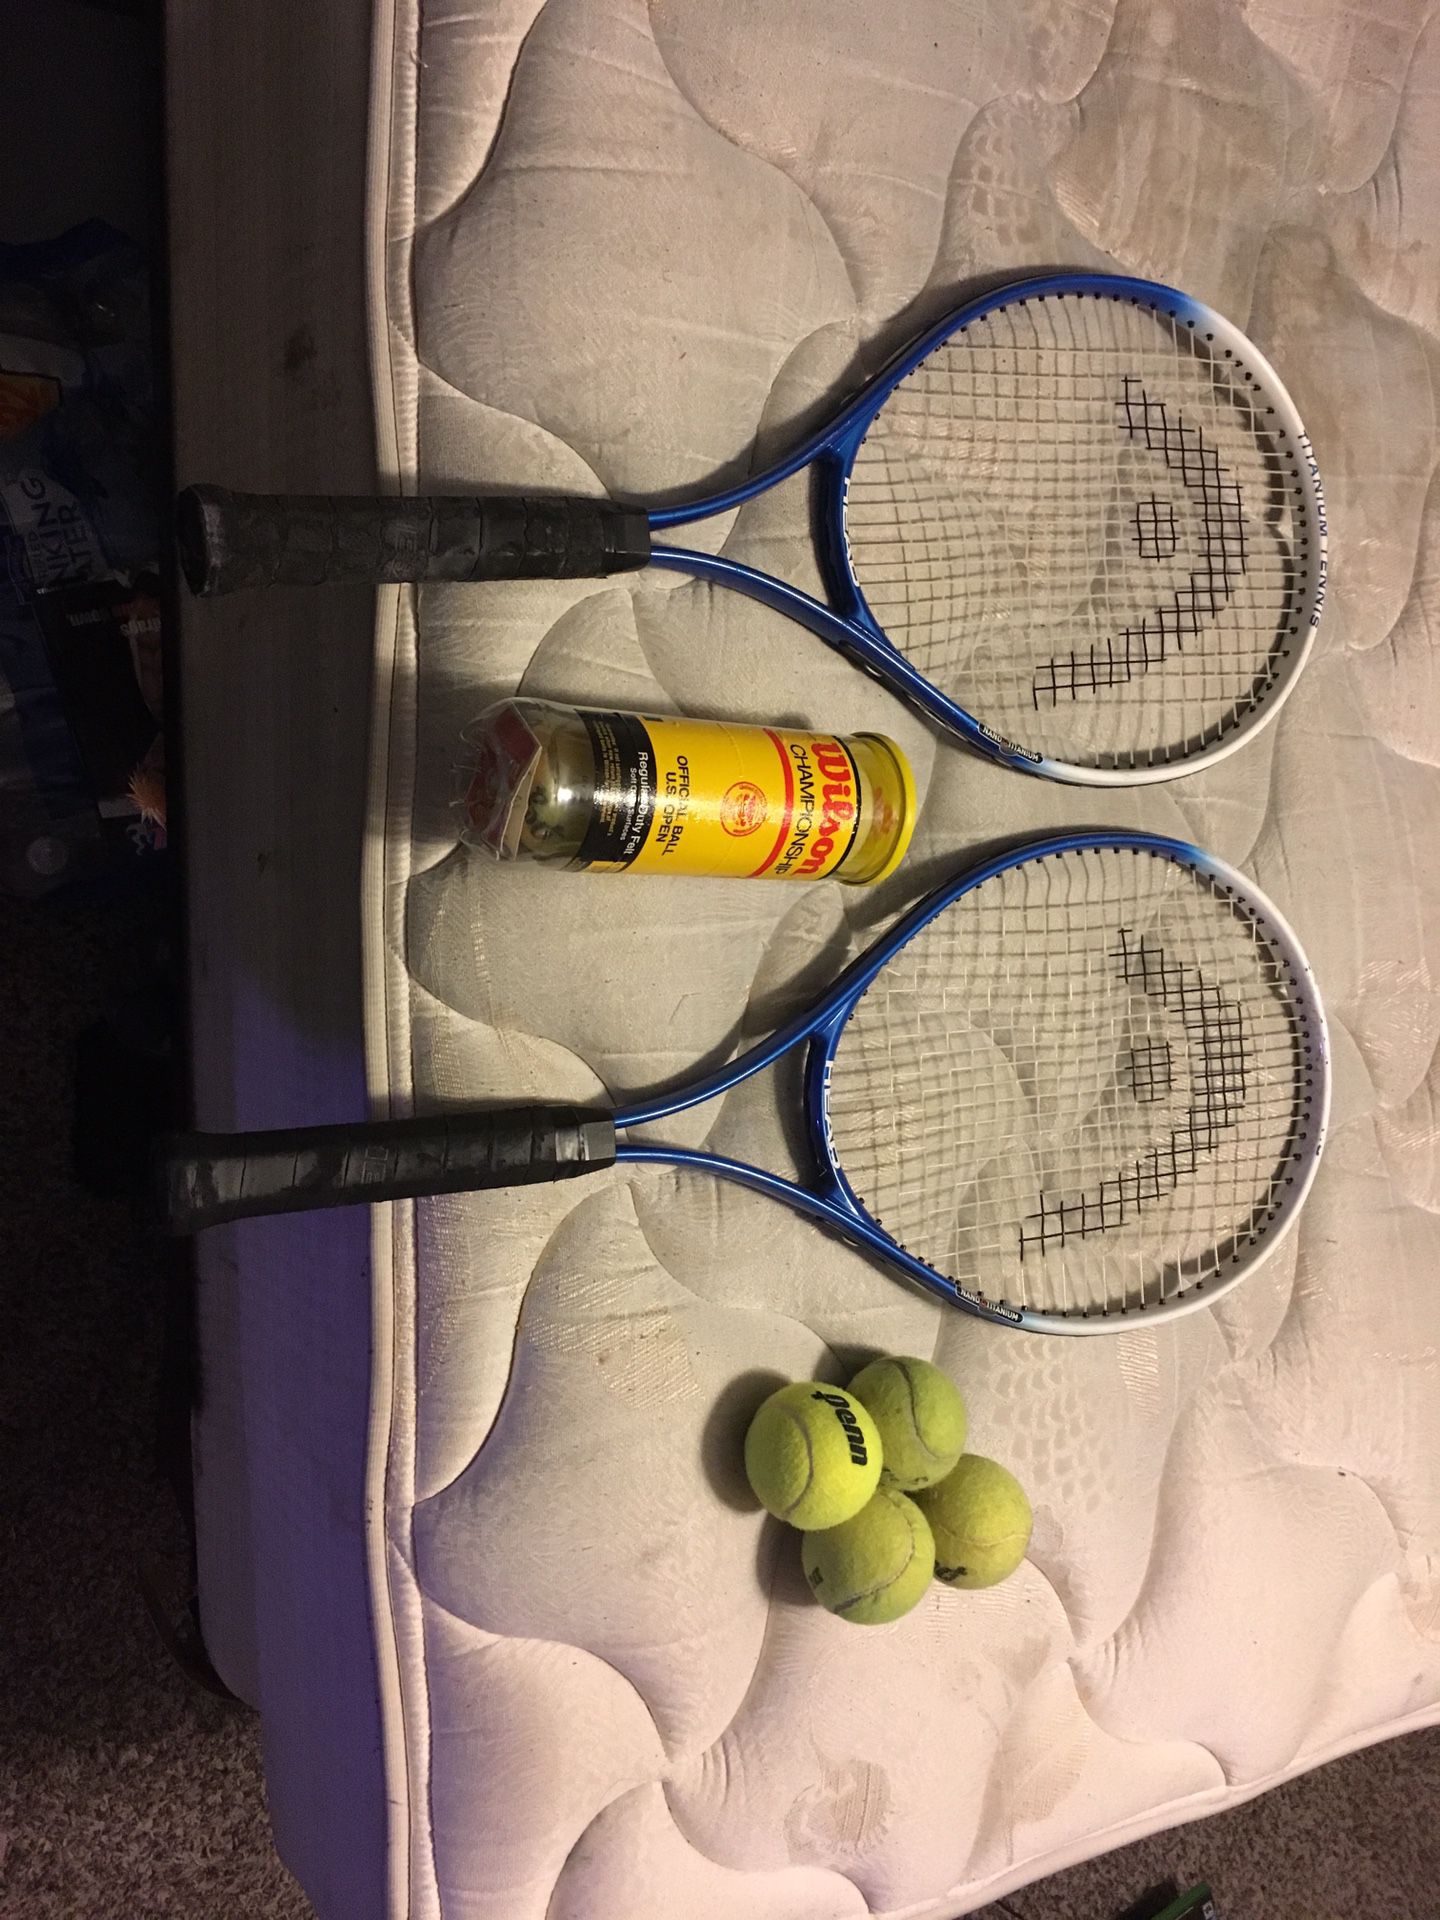 Lightly used tennis rackets with balls